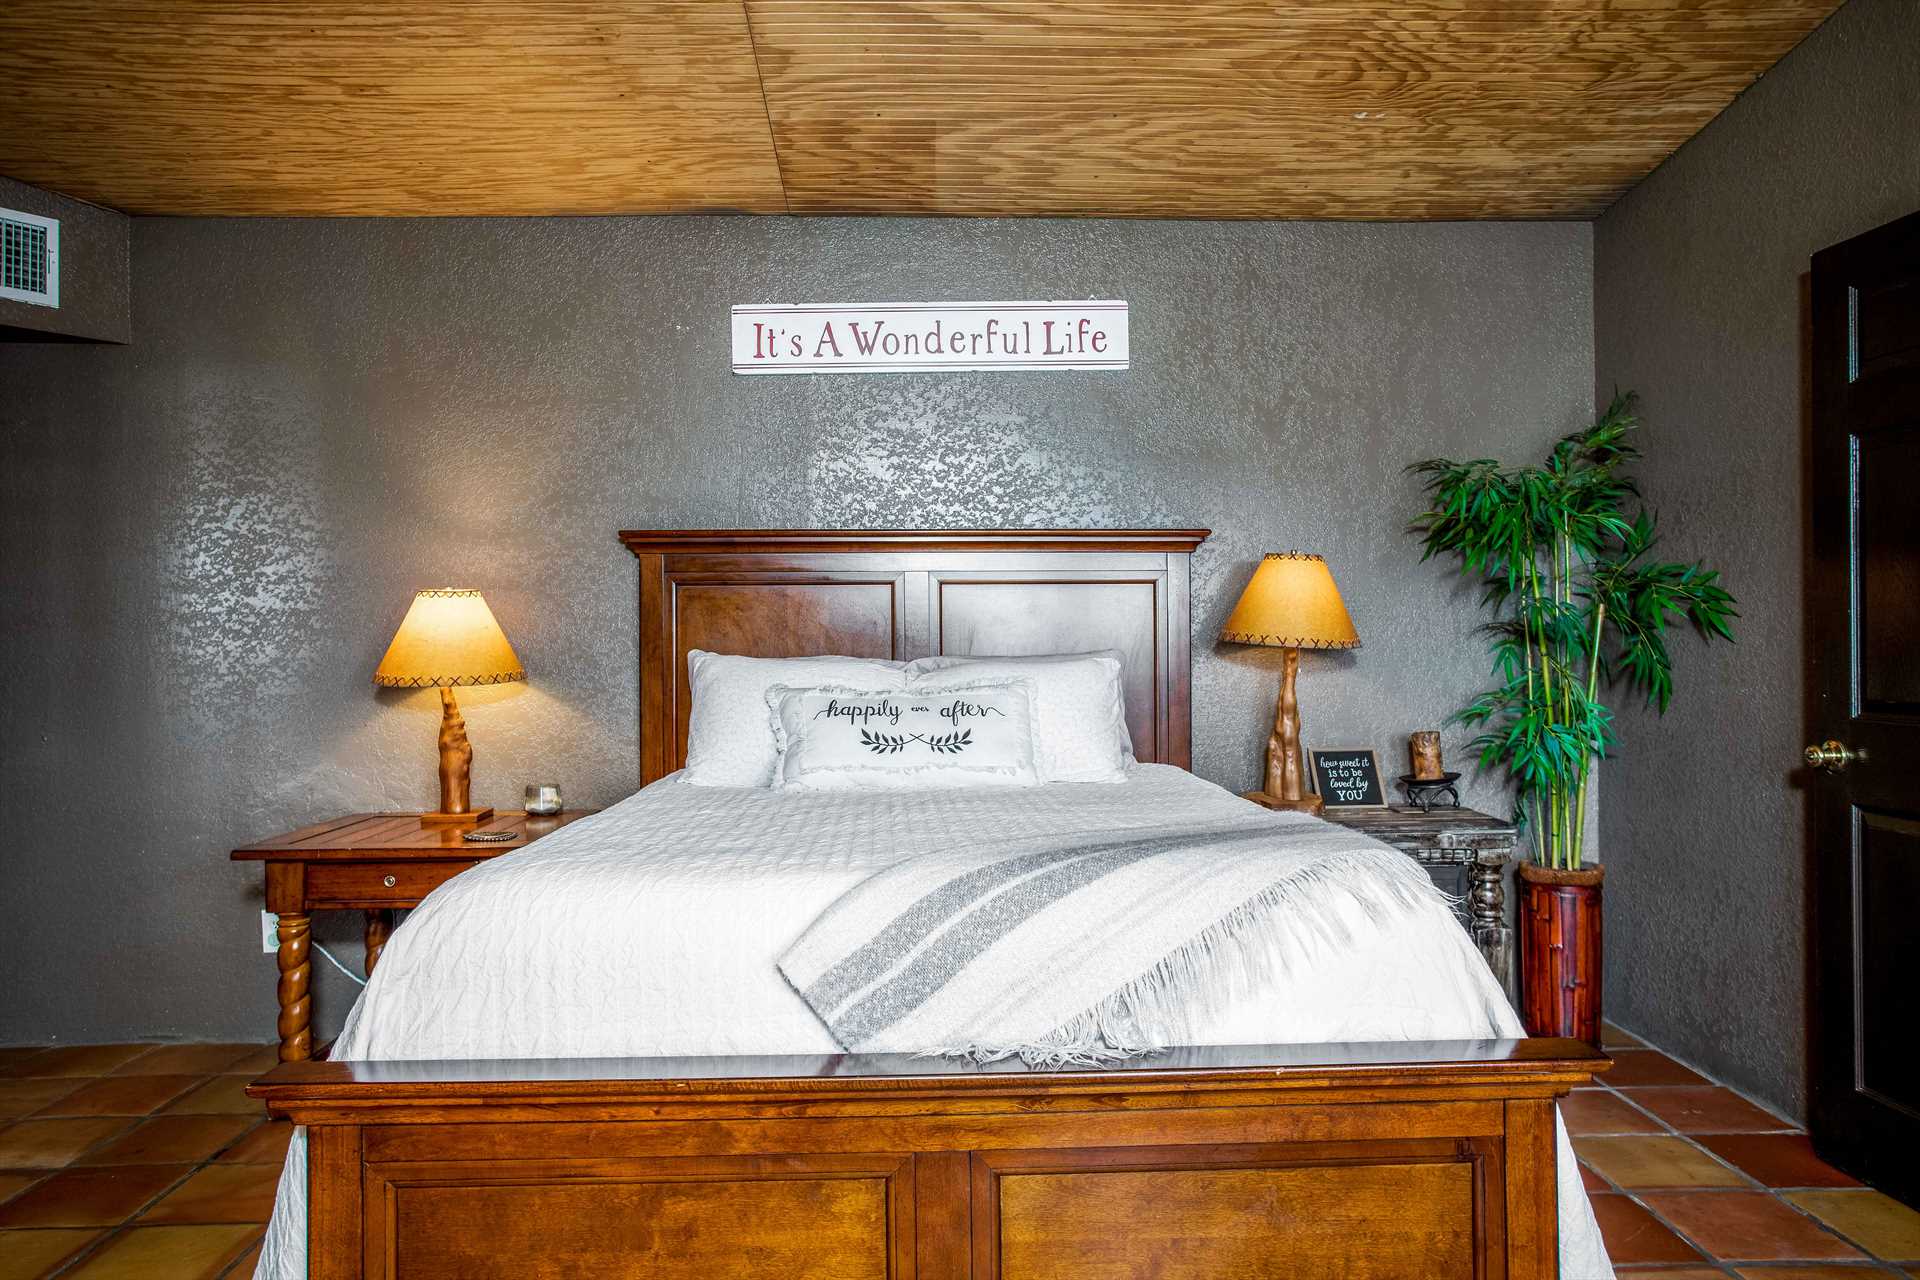                                                 The stately wood-framed queen-sized bed comes complete with fresh and clean linens for the duration of your visit with us.